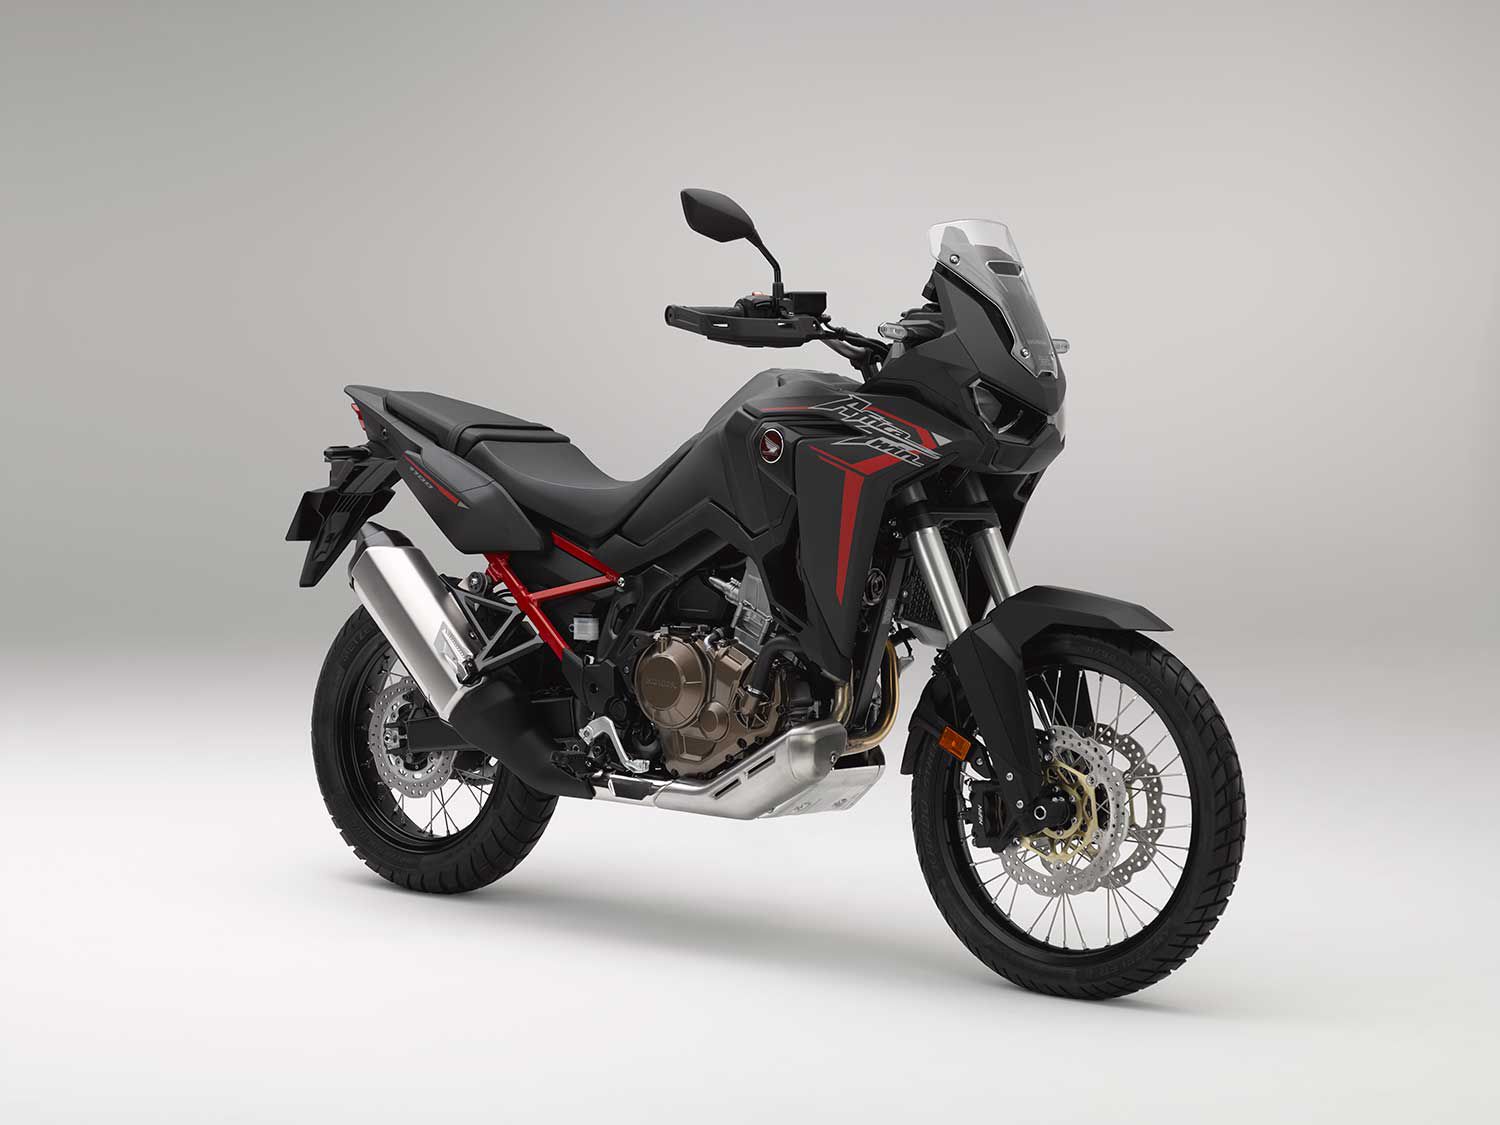 Large-bore adventure-touring motorcycles can be expensive, but Honda’s Africa Twin is one of the most affordable and one of the most capable.